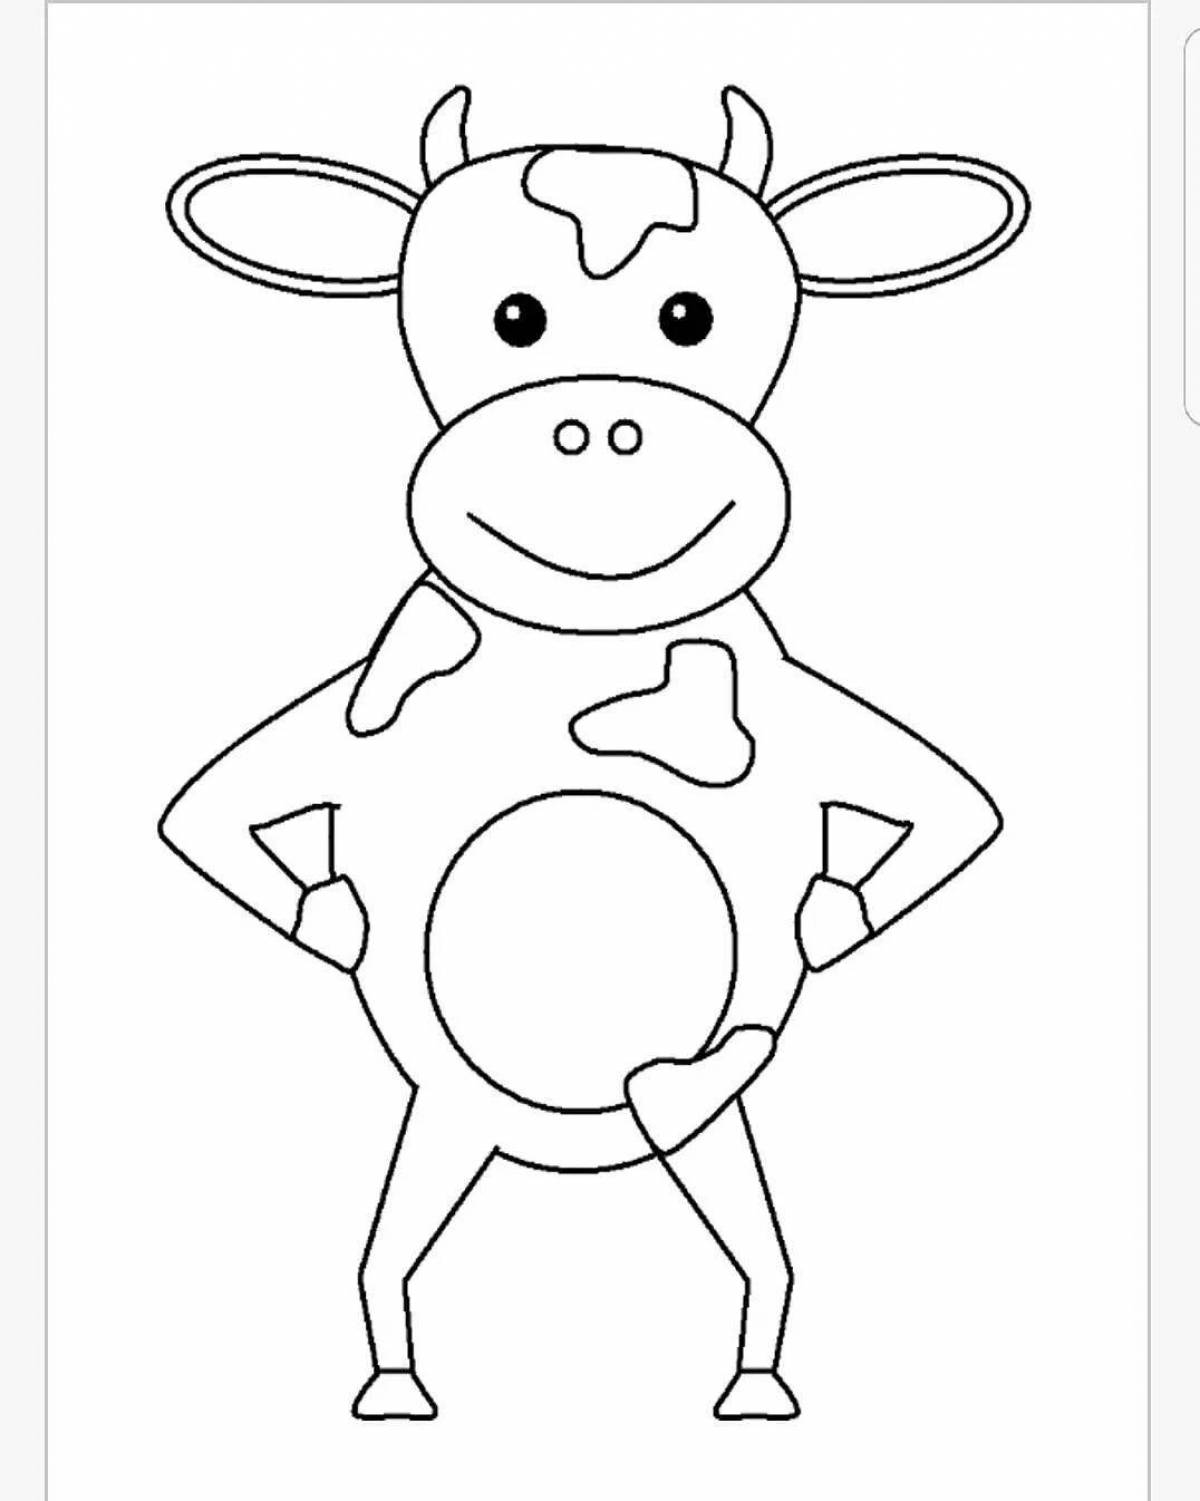 Coloring page naughty cute cow